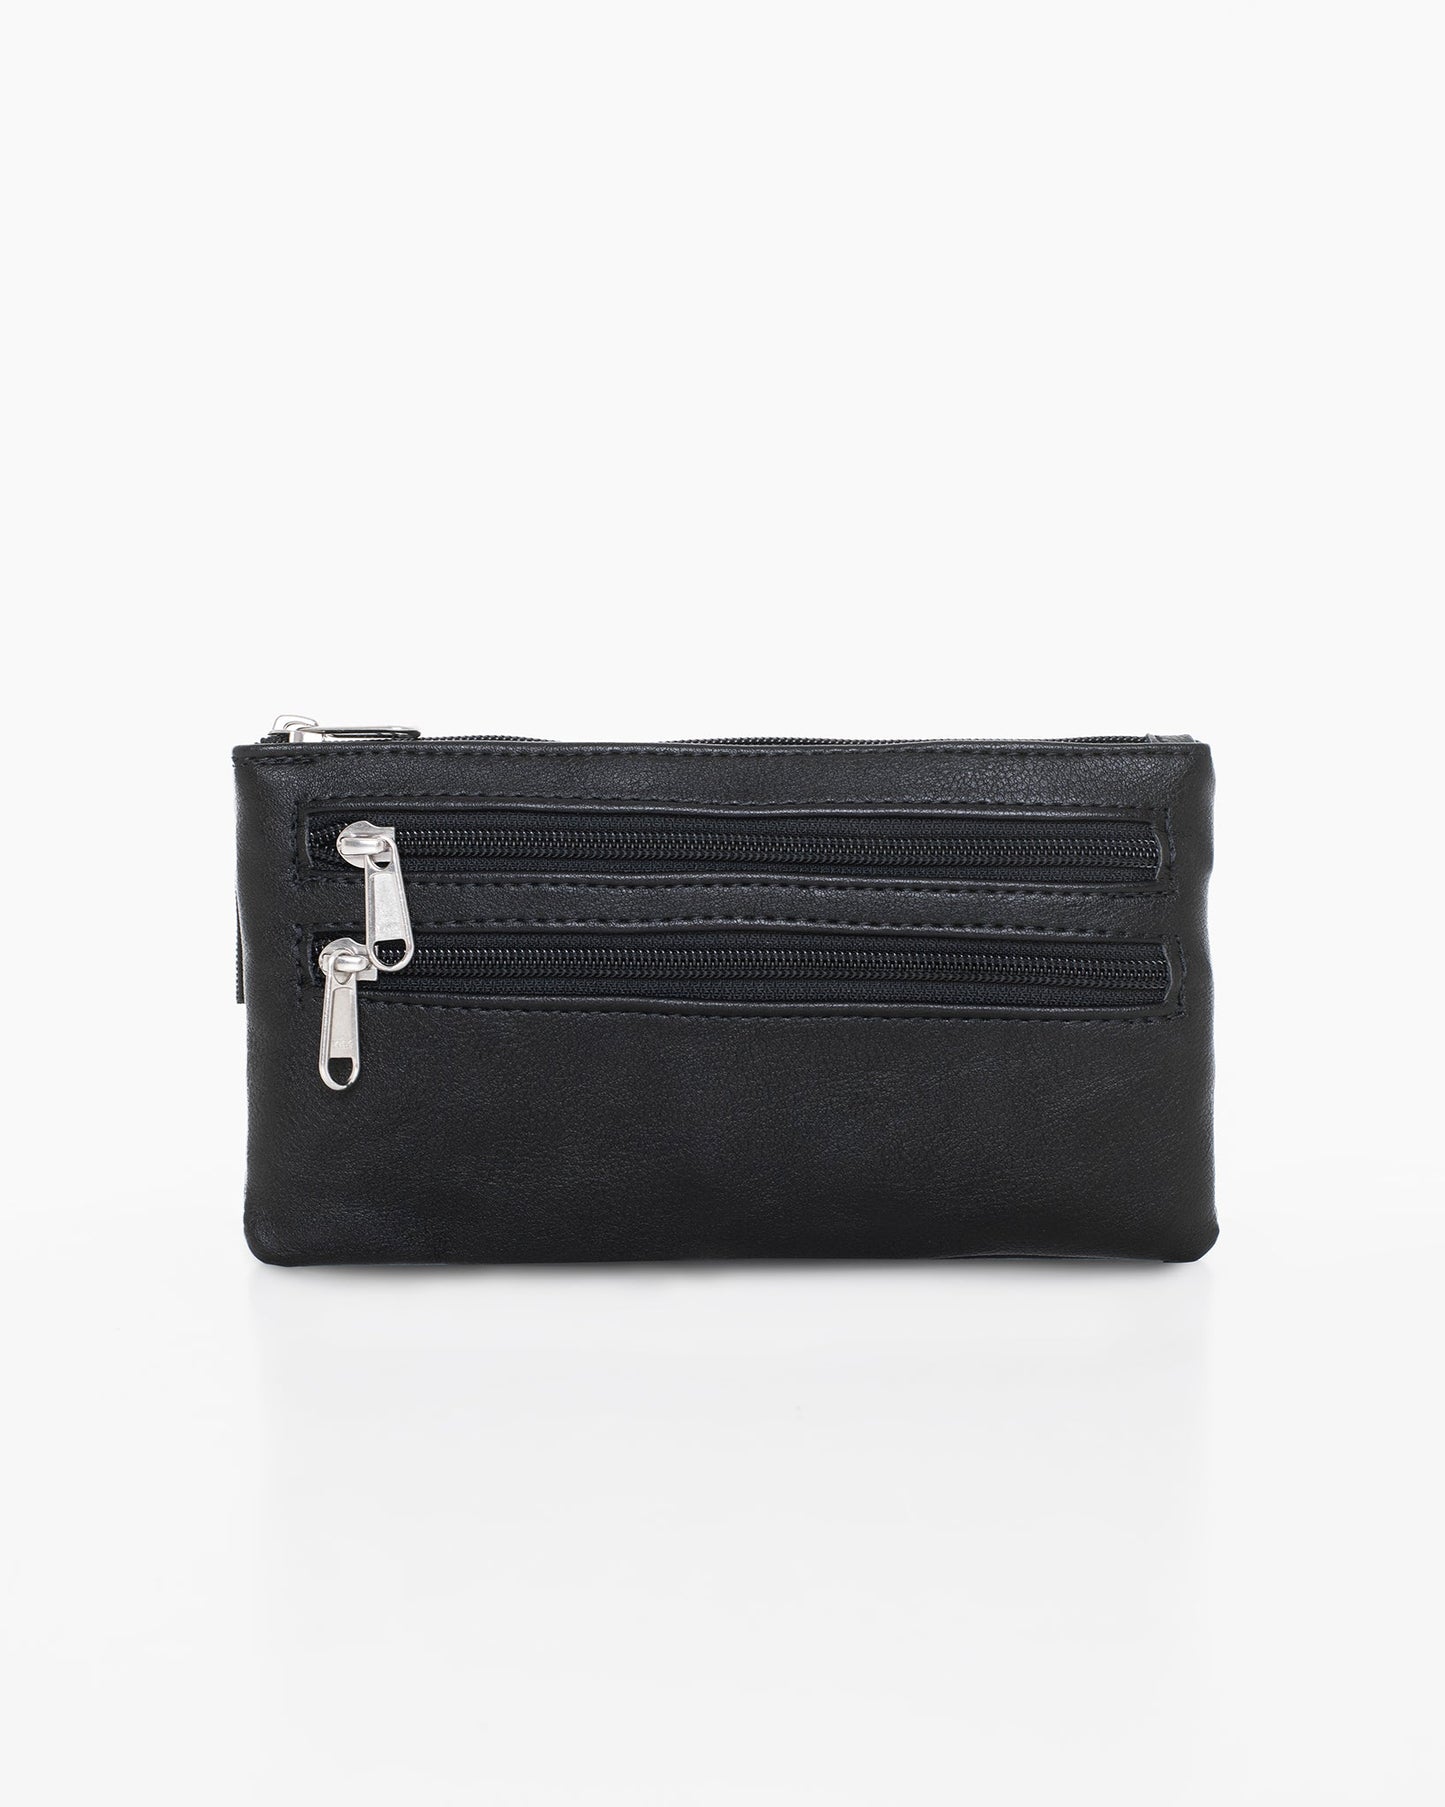 A black waist bag with silver zippers, made in Finland from recycled polyester by Nabo. Multiple zipped pockets, dimensions 22 x 12 x 1 cm.